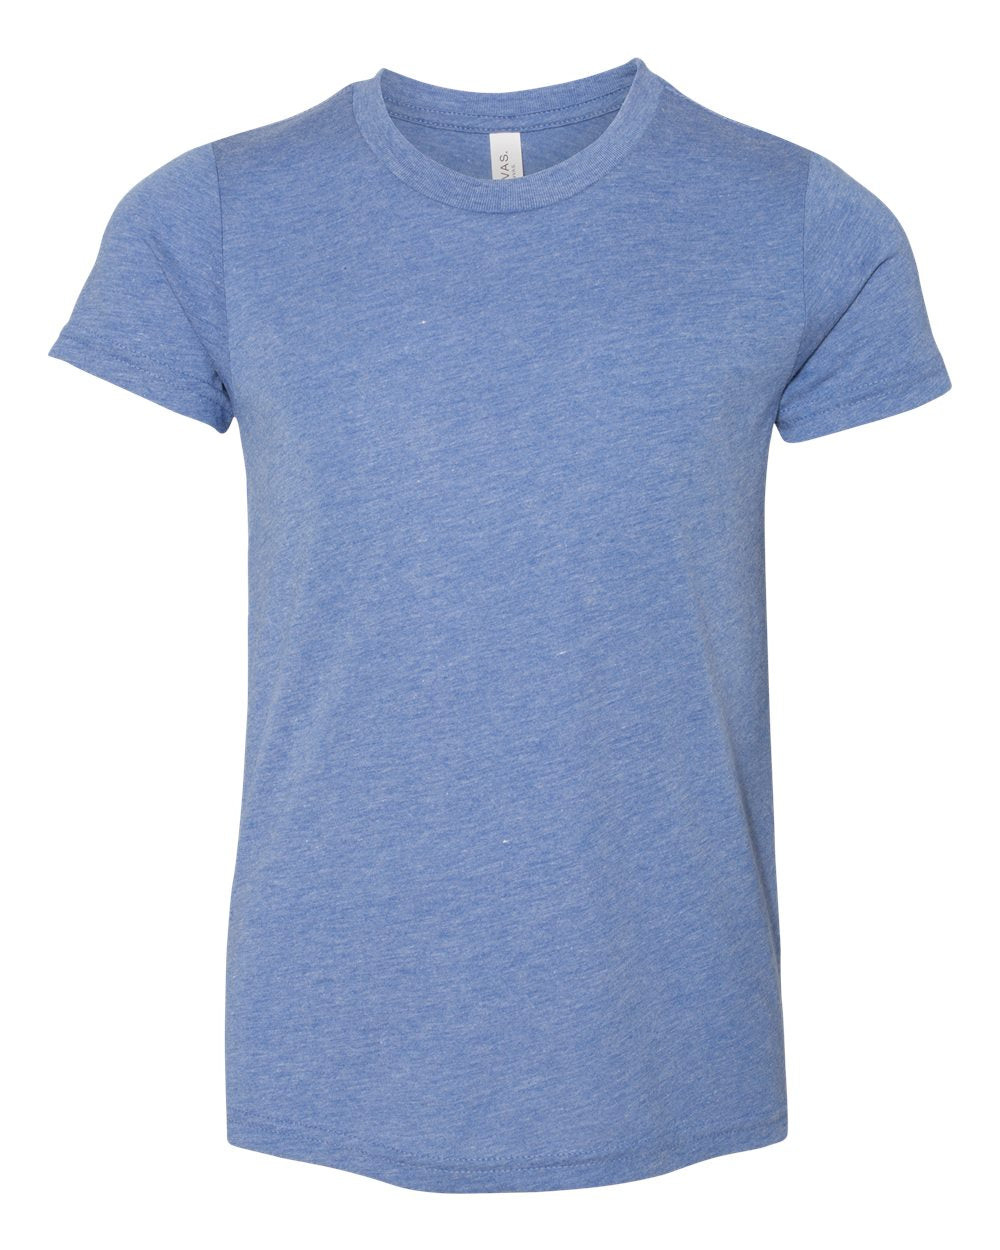 Bella + Canvas Youth Triblend Tee (3413y) in Blue Triblend